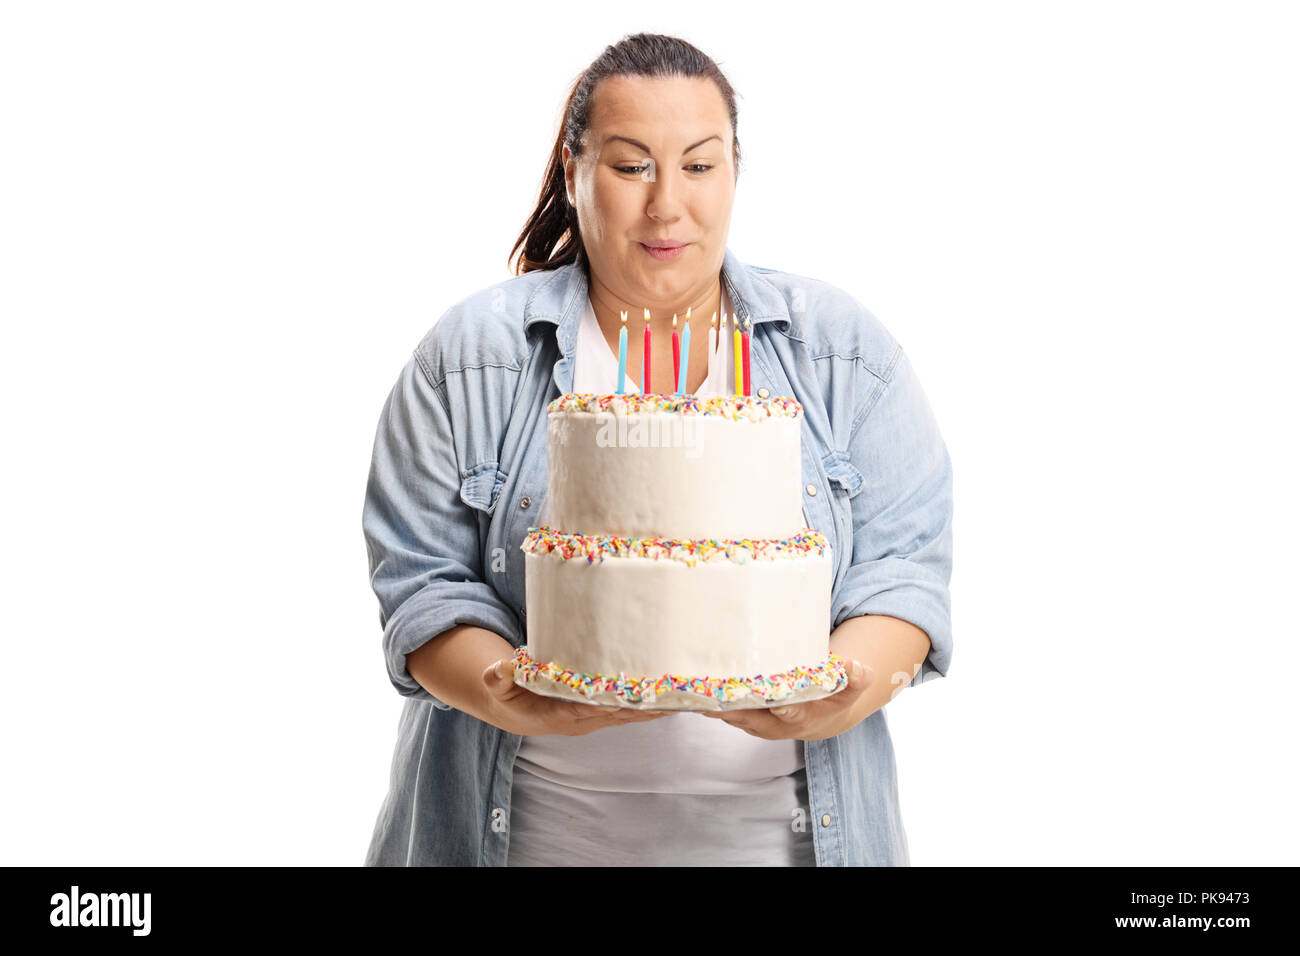 Overweight woman blowing candles on a birthday cake isolated on white background Stock Photo